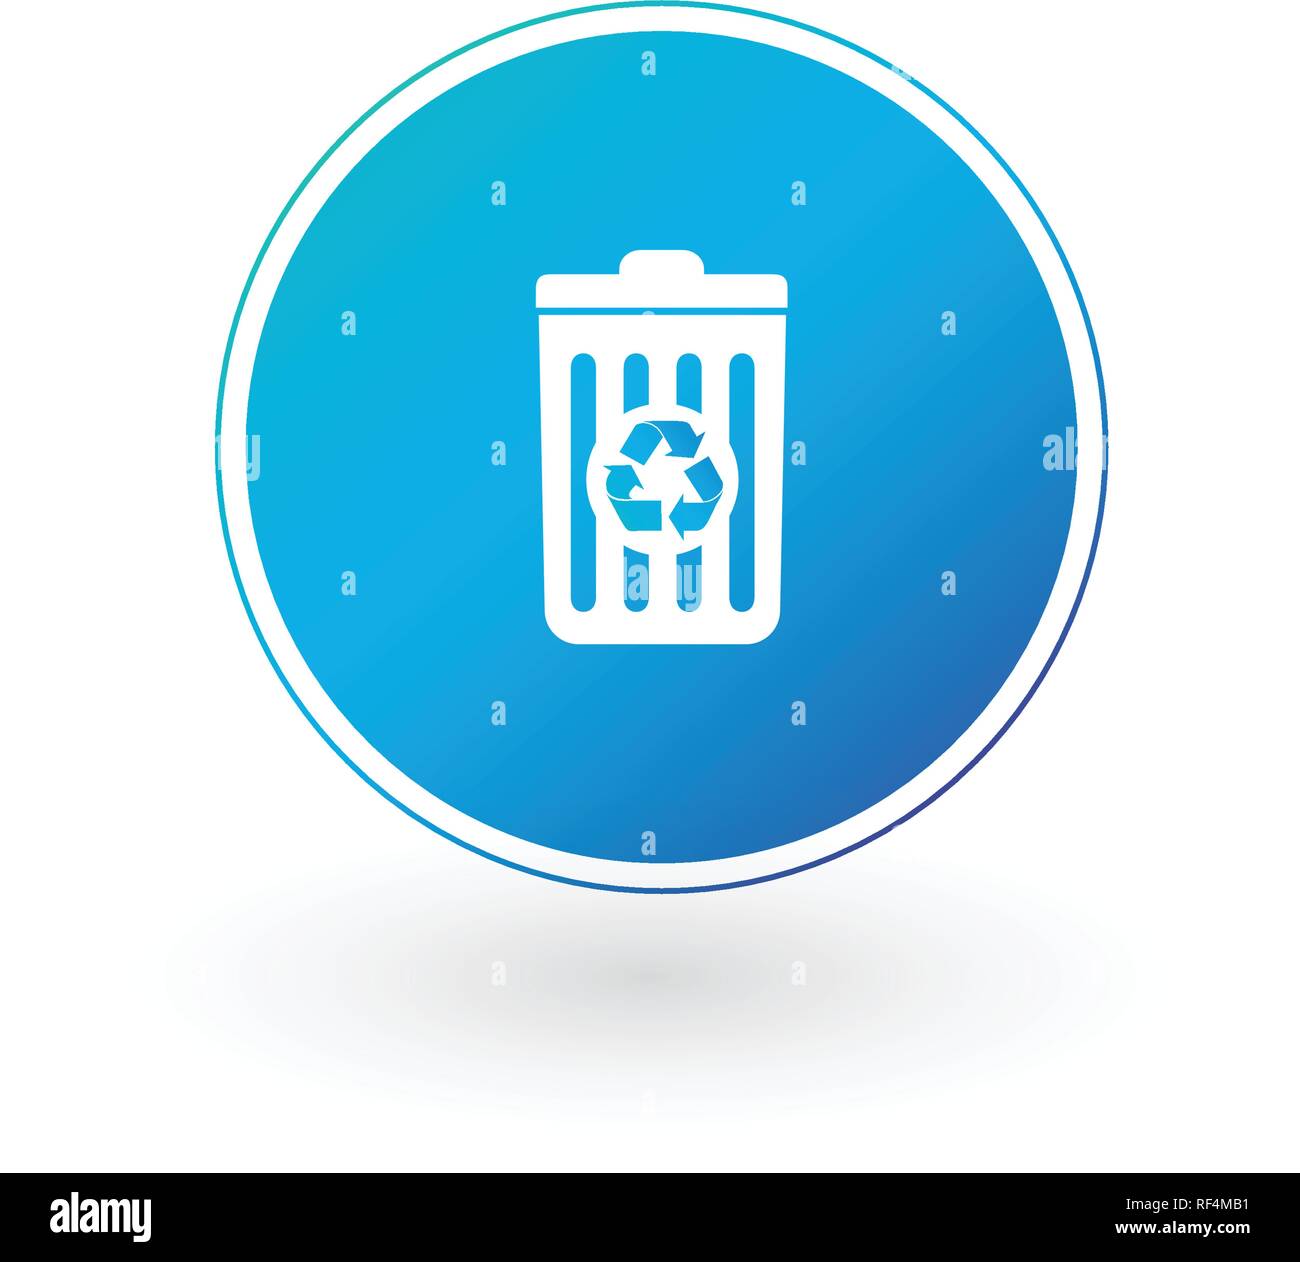 Delete icon , Trash can, Recycle bin, Garbage sign isolated on white background. Can be used for Web site, UI, apps. Stock Vector